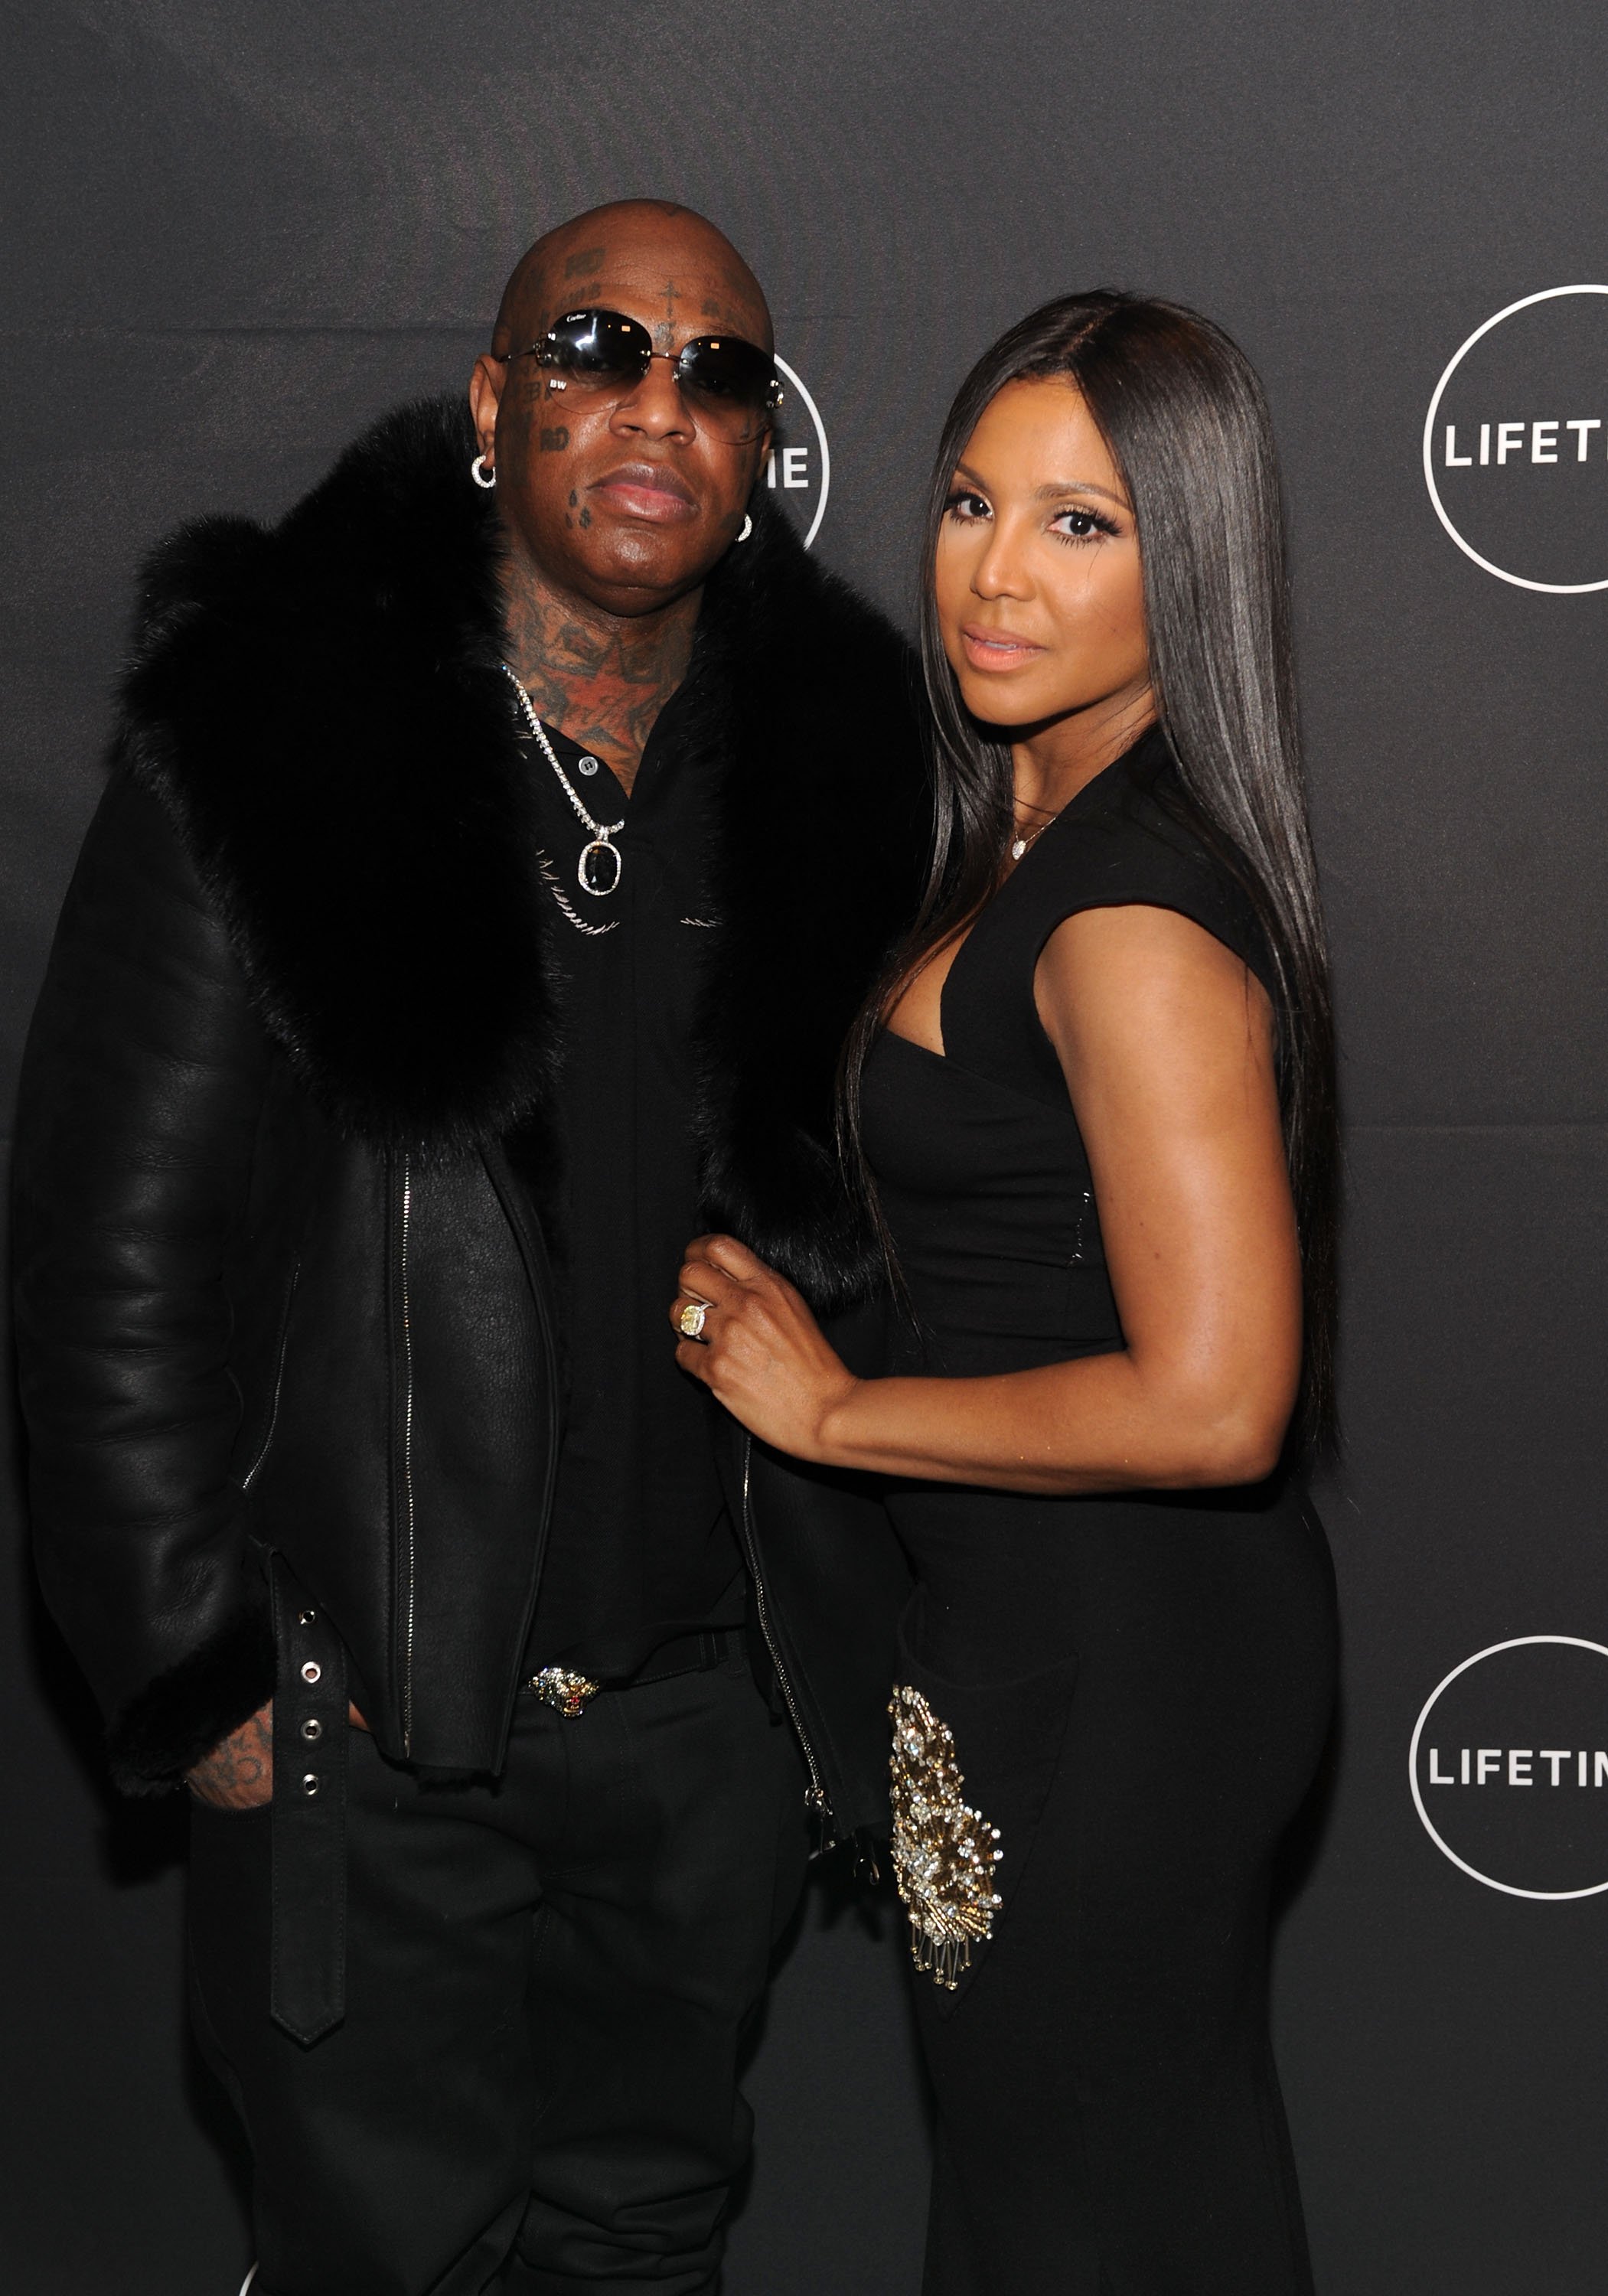 Birdman and Toni Braxton at Lifetime's Film,'Faith Under Fire: The Antoinette Tuff Story' red carpet screening and premiere event at NeueHouse Madison Square In New York, NY on January 23, 2018. | Source: Getty 